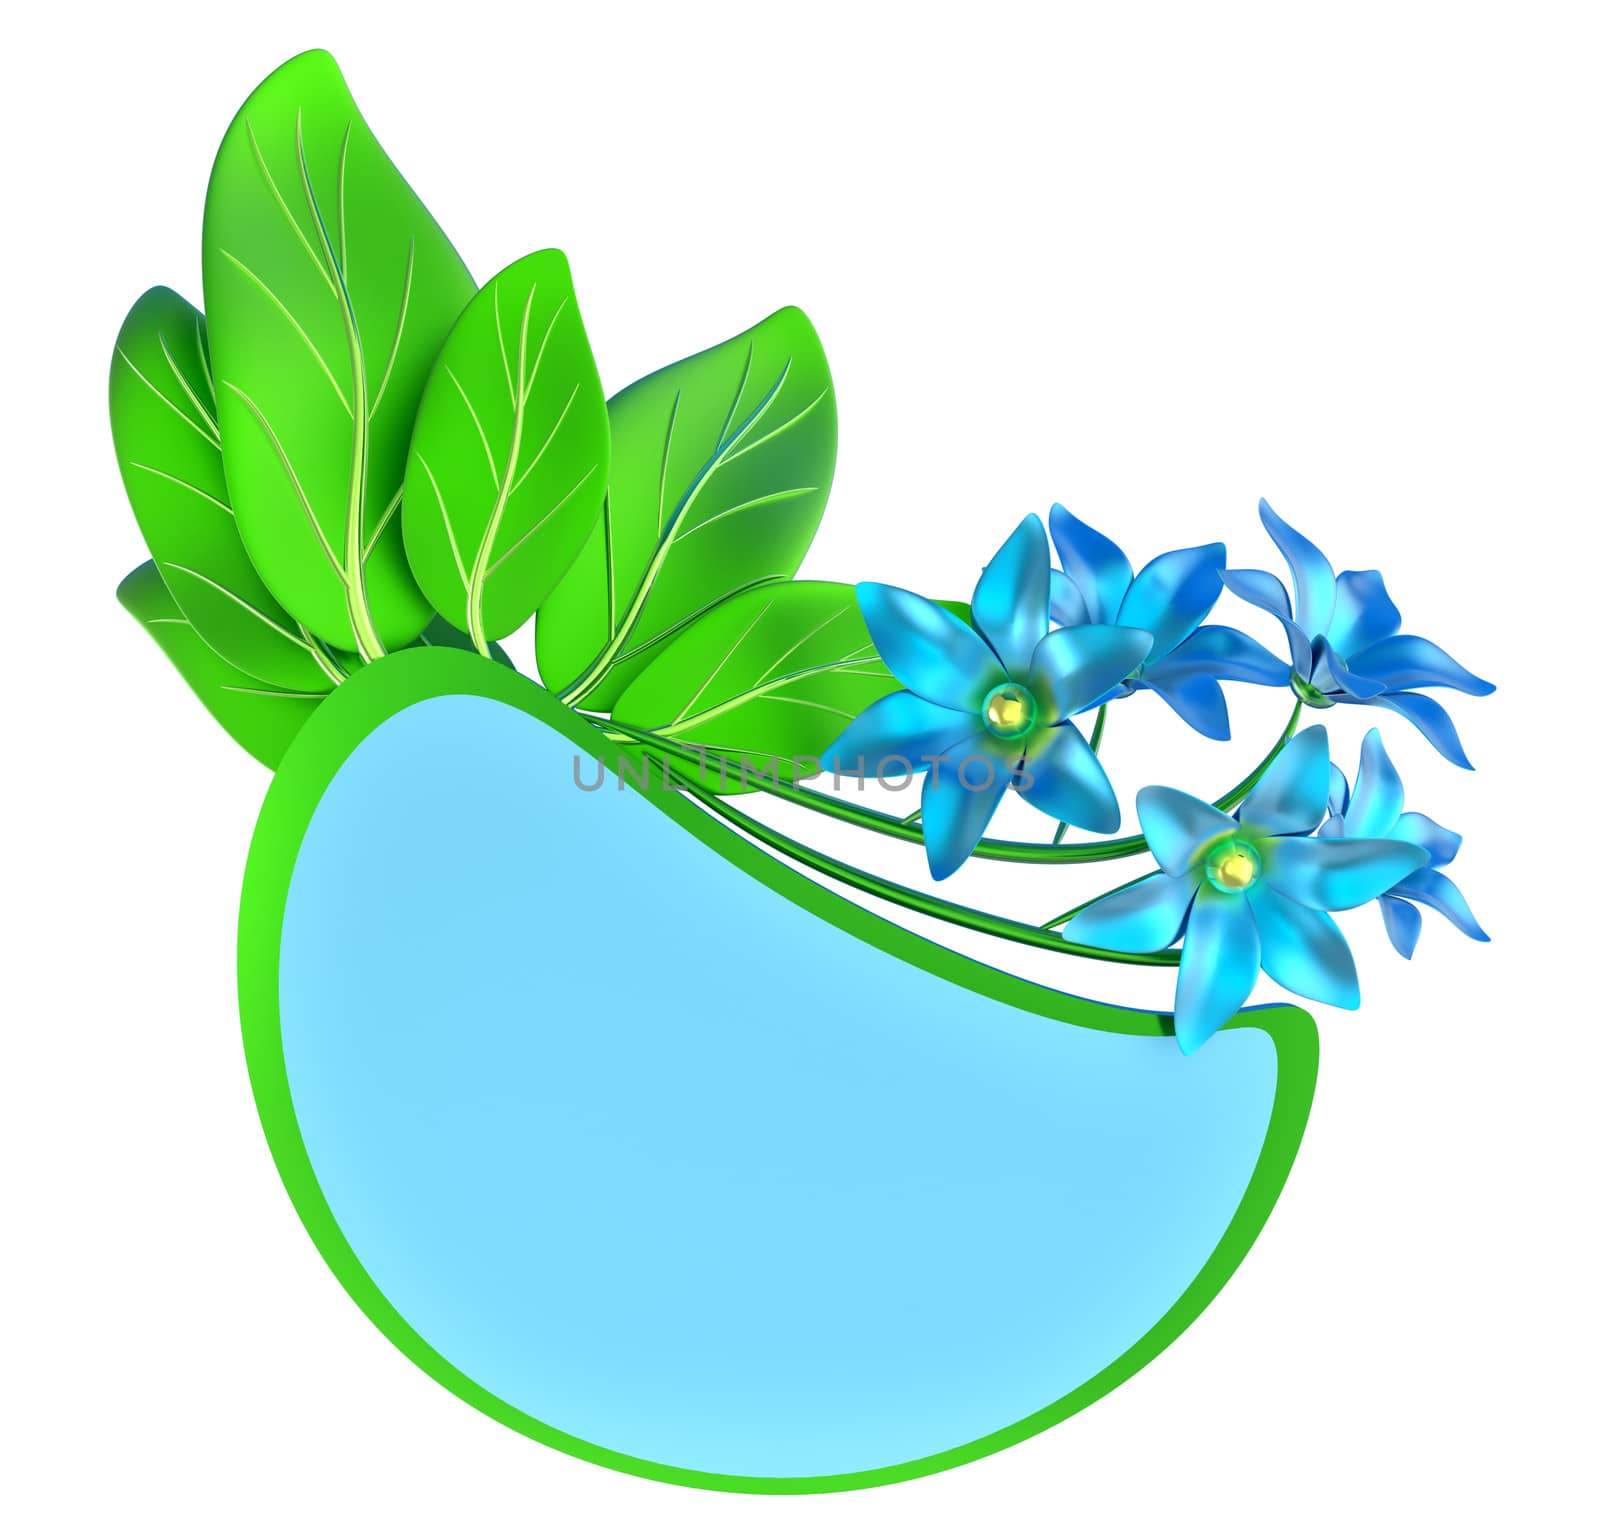 Green and blue form with leafs and flowers